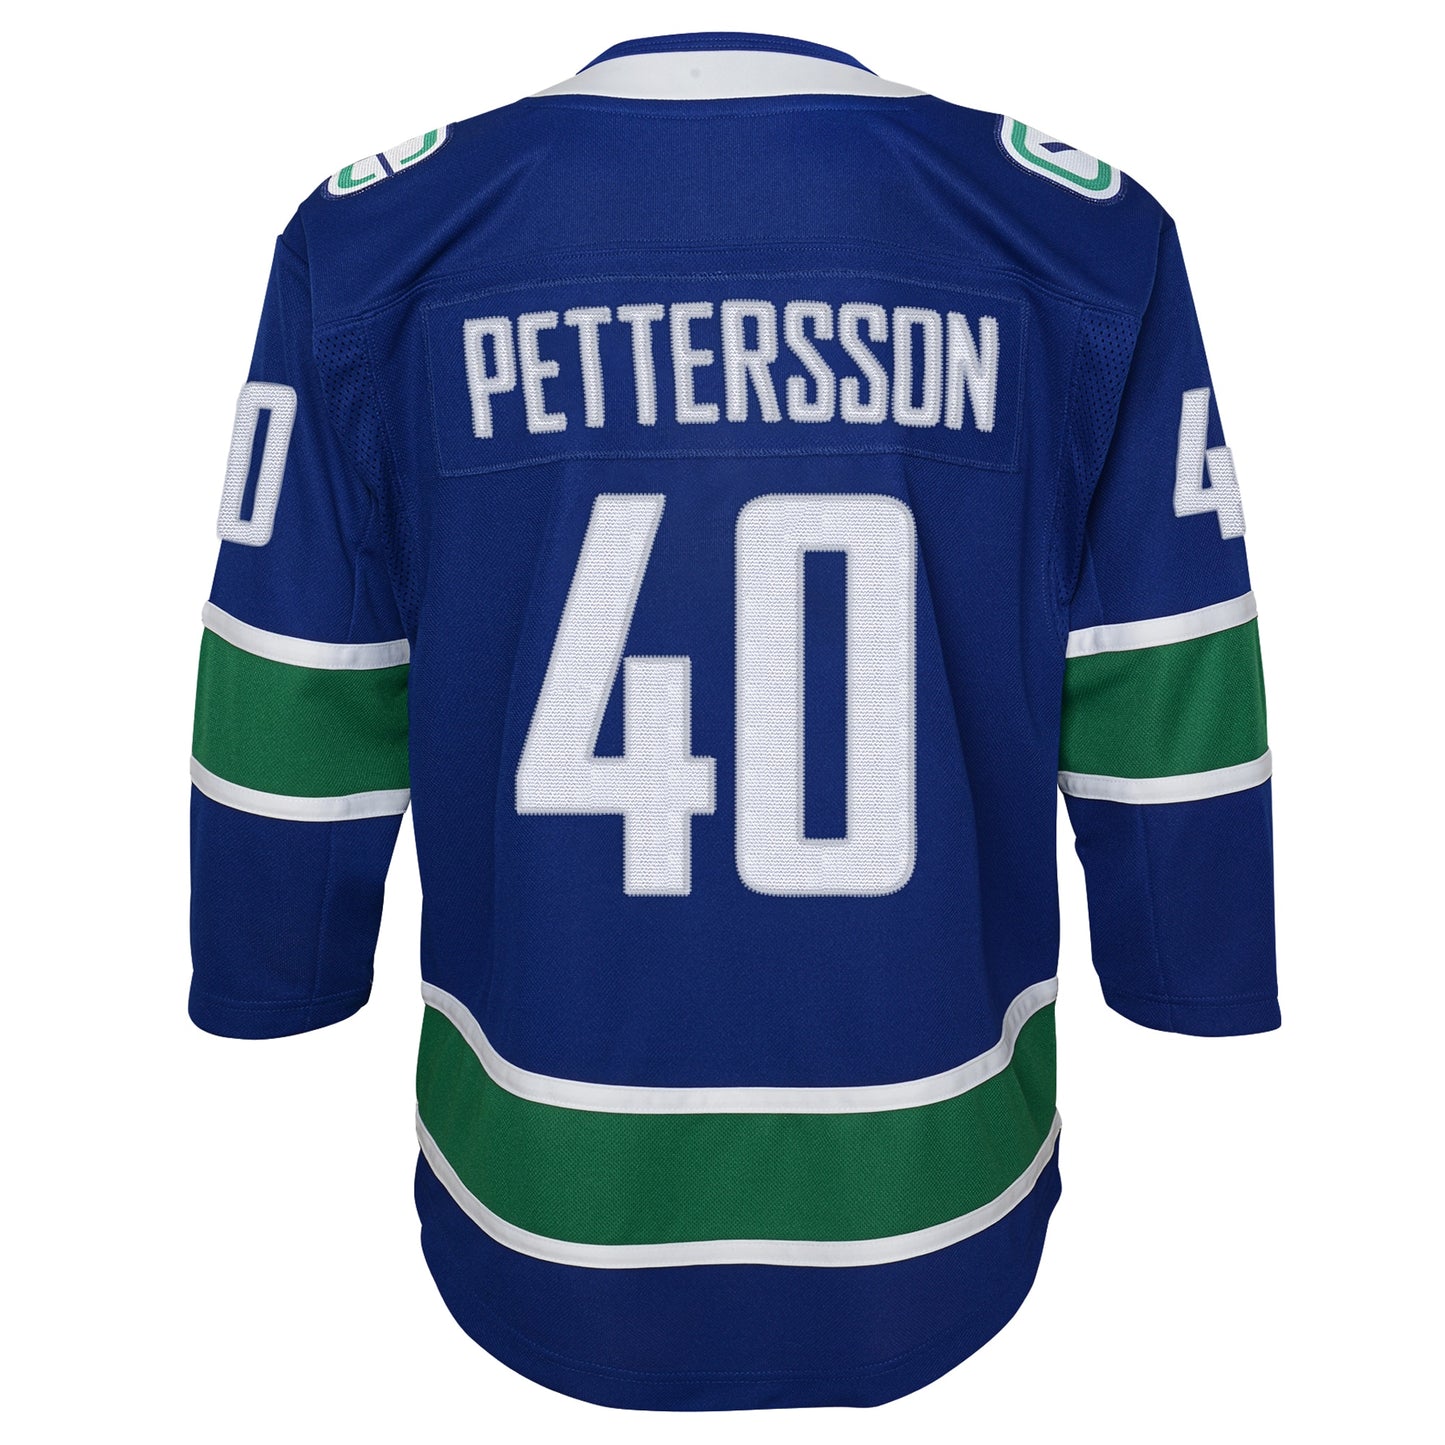 Elias Pettersson Vancouver Canucks Youth 2019/20 Home Premier Player Jersey - Royal